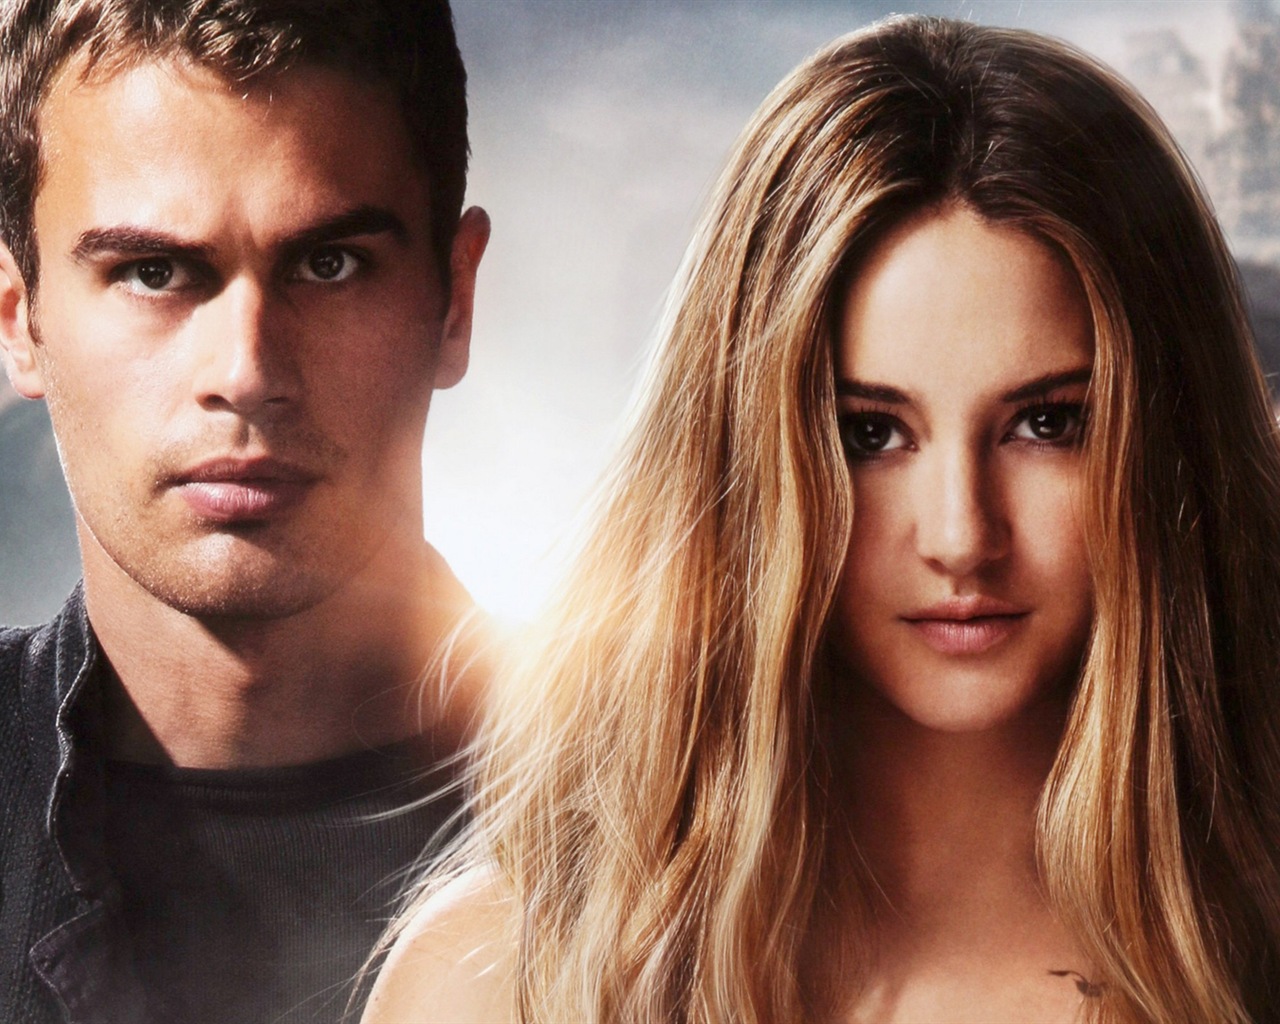 Divergent movie HD wallpapers #2 - 1280x1024